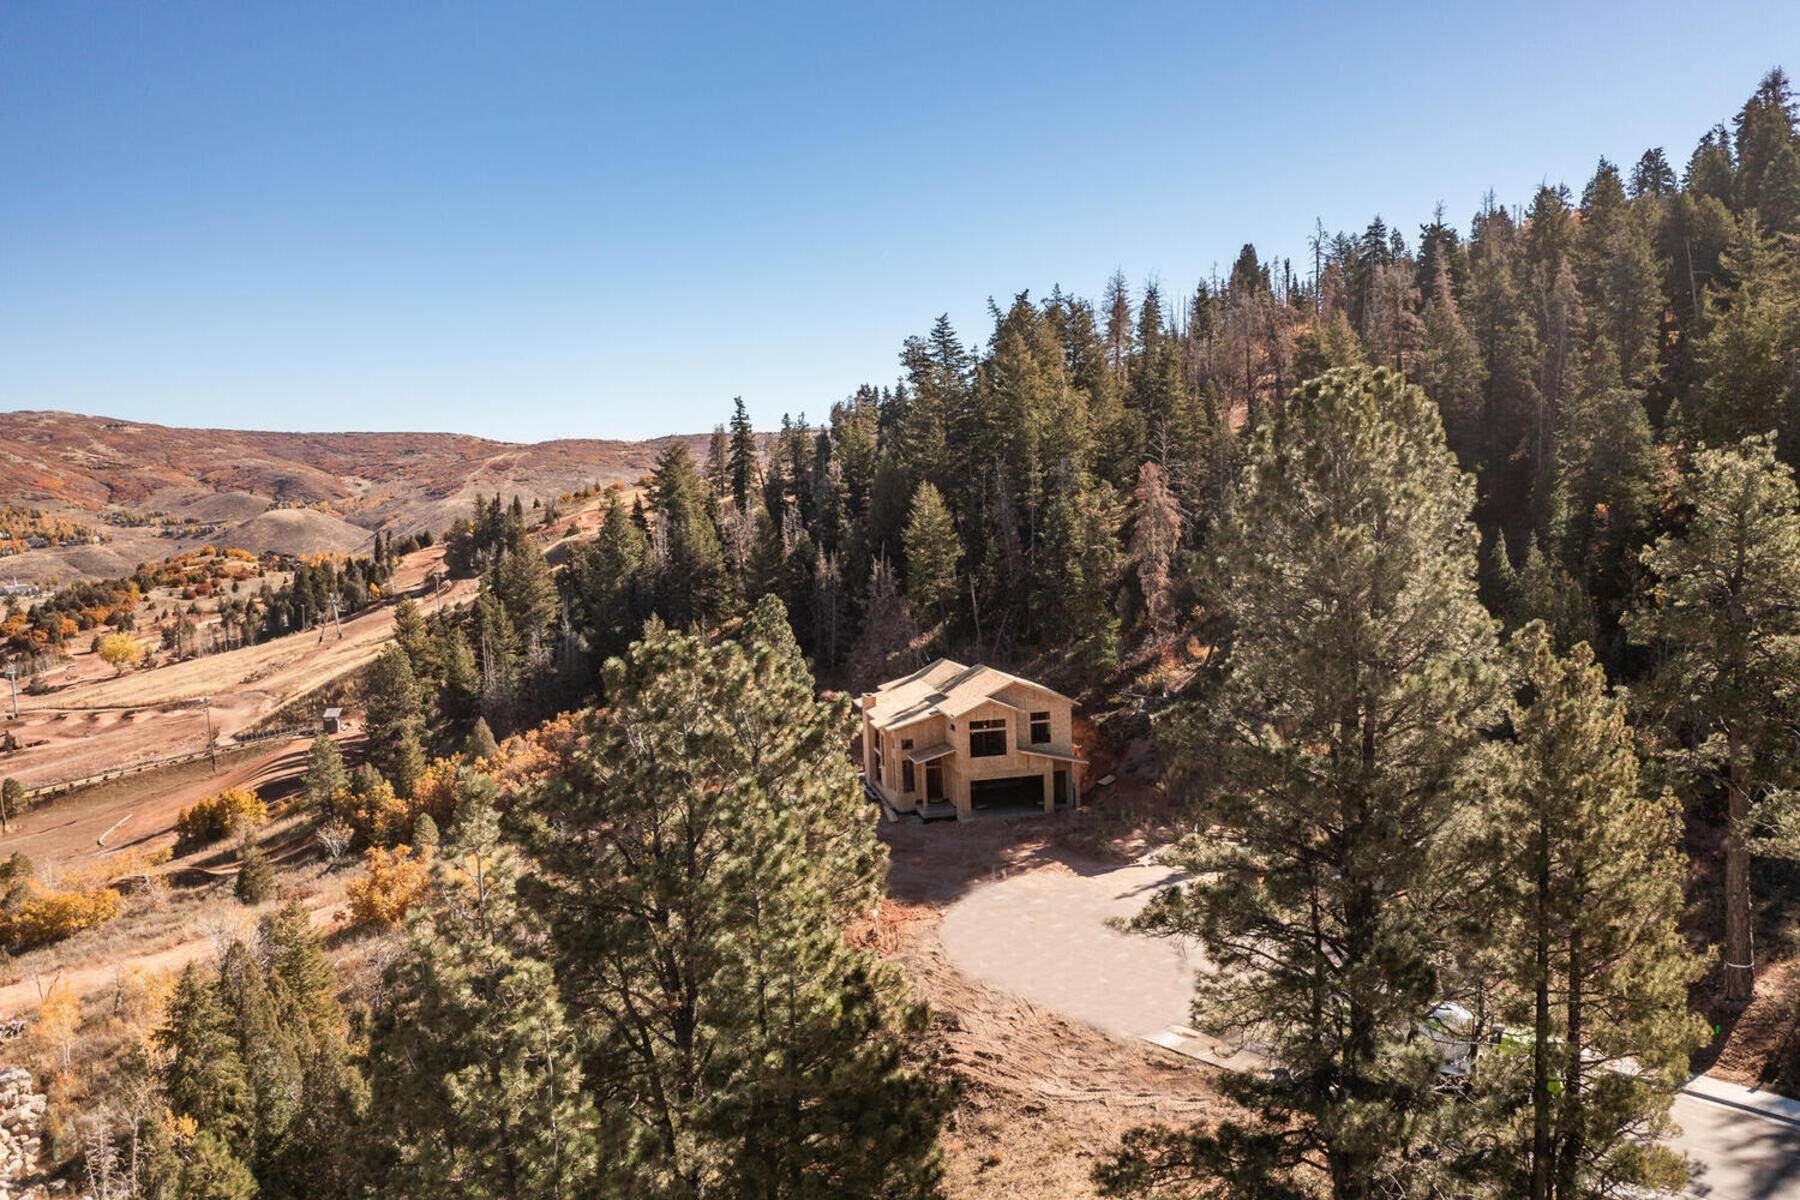 8. Land for Sale at A Park City Residential Development Surrounded By 1,000 Acres Of Open Space 4043 W Crest Court, Lot 309 Park City, Utah 84098 United States